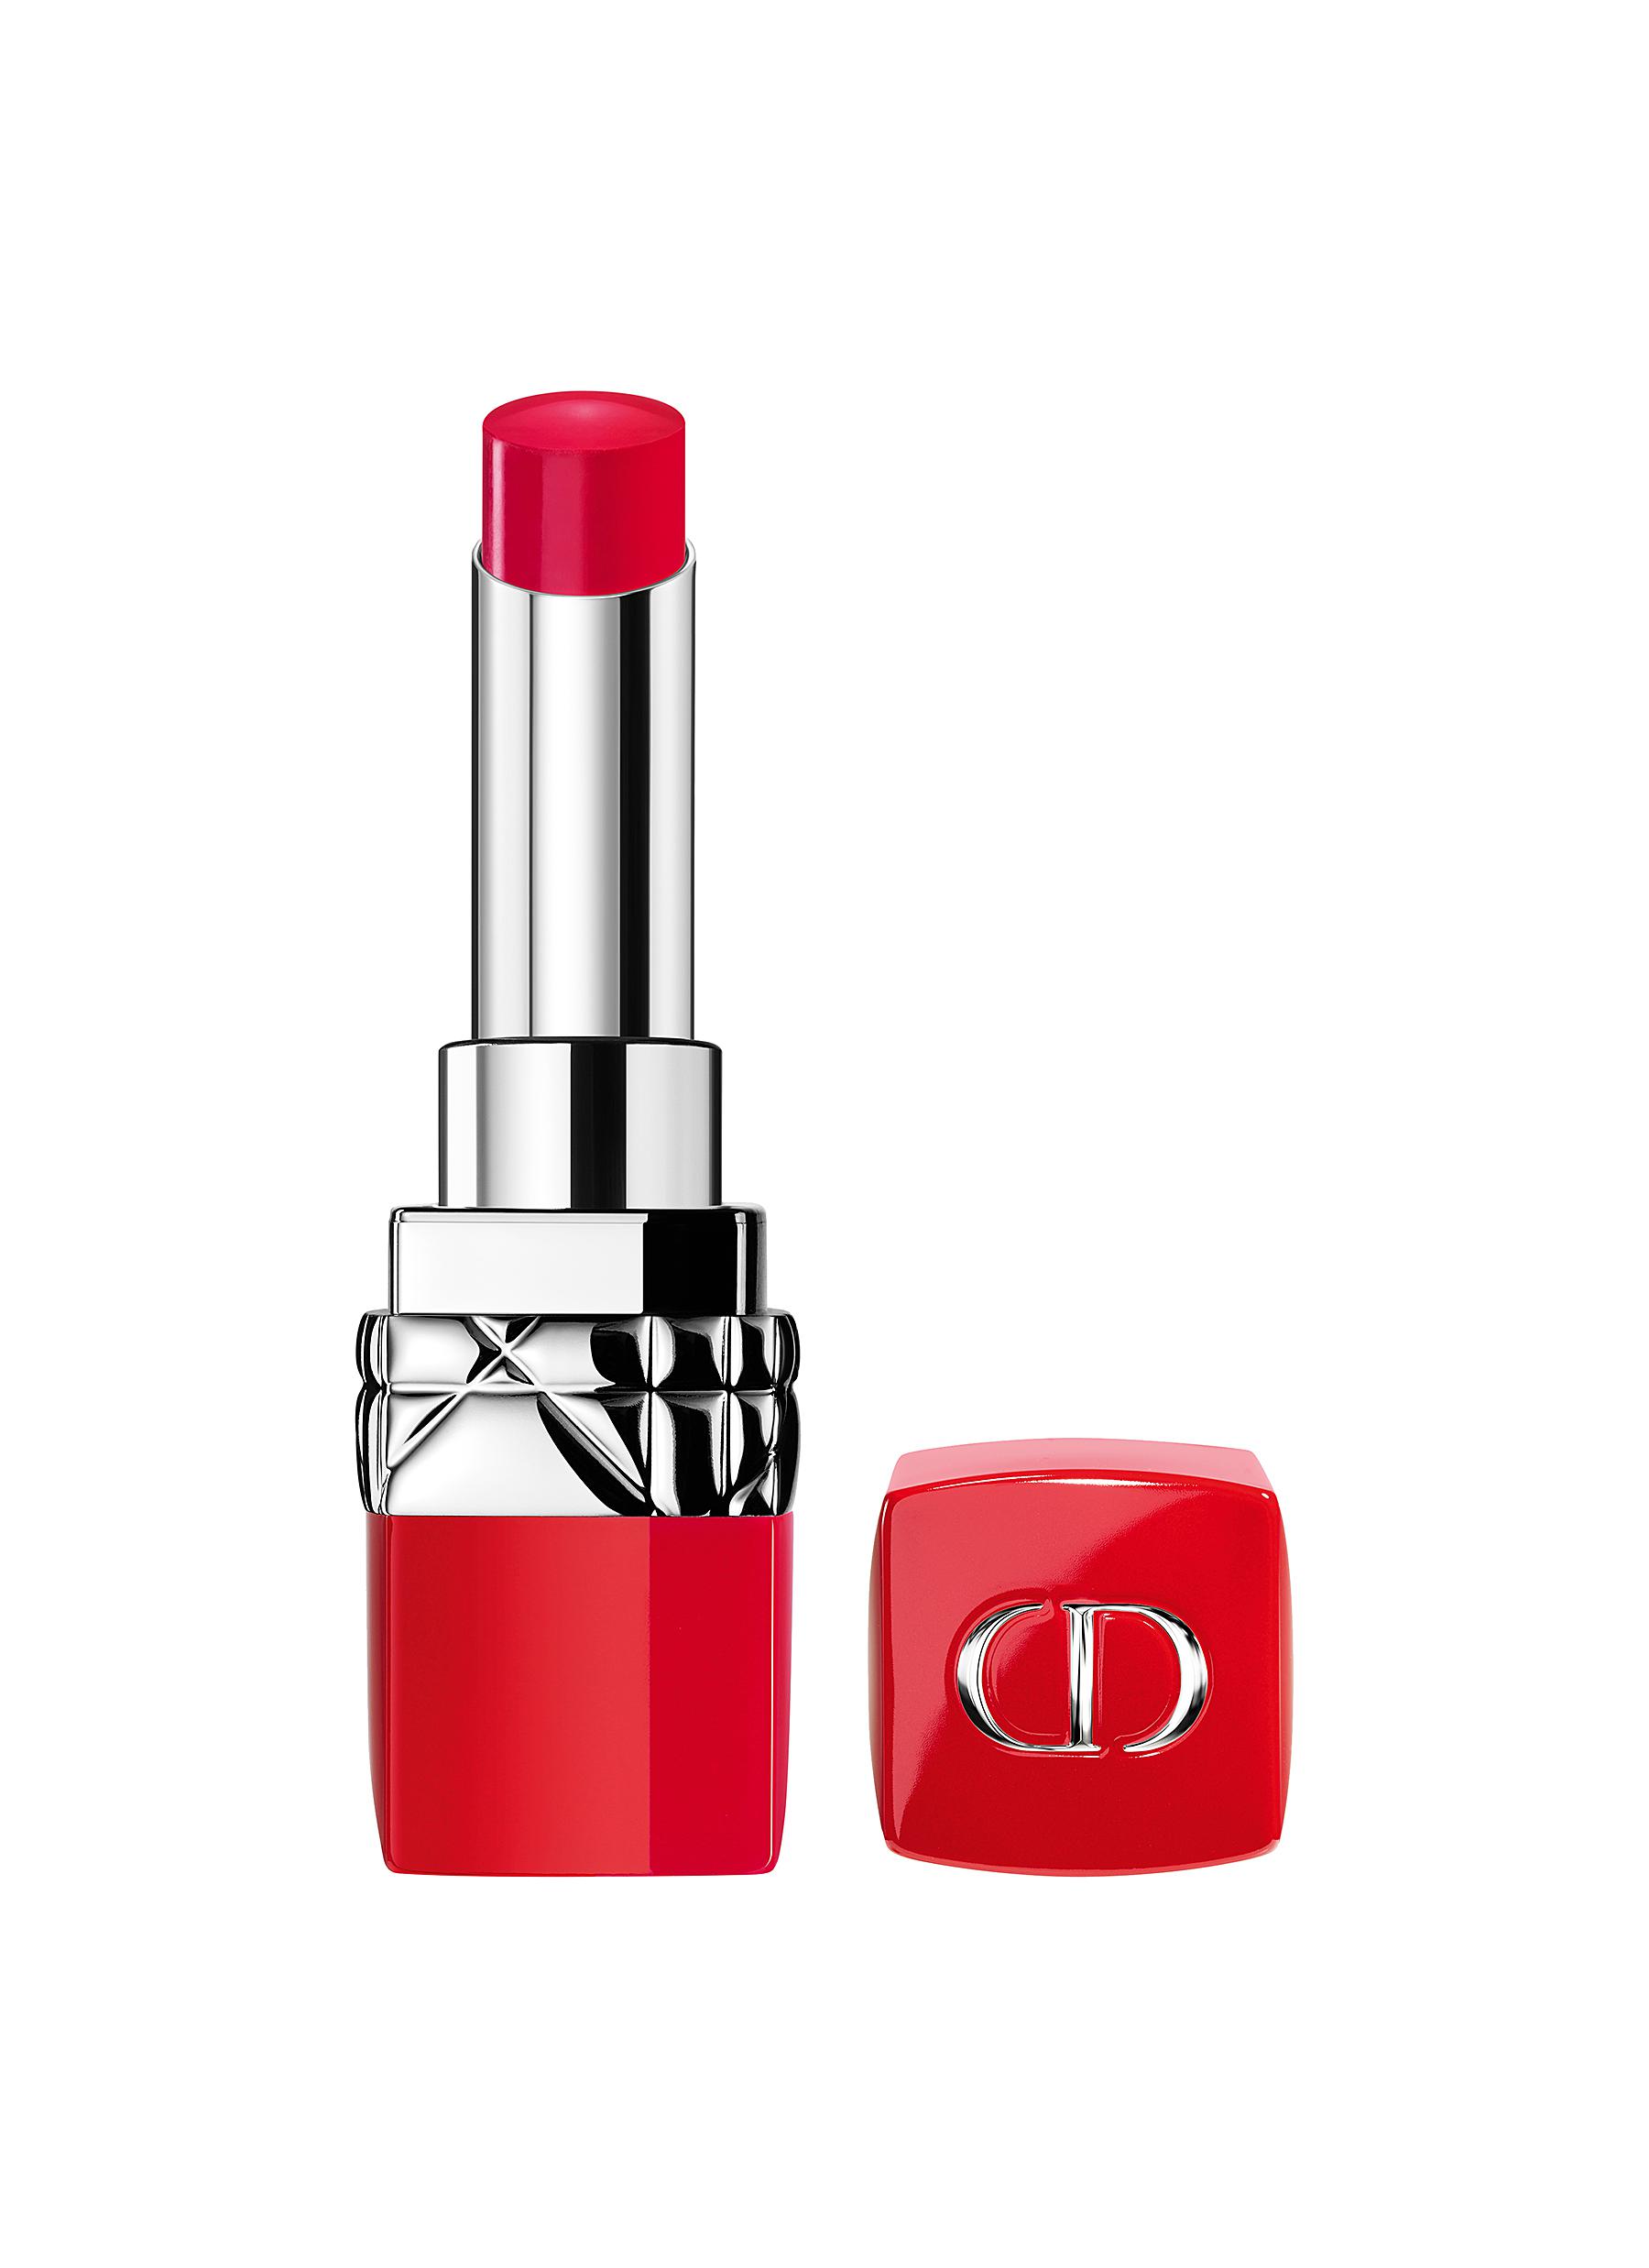 rouge dior ultra rouge 770 ultra love